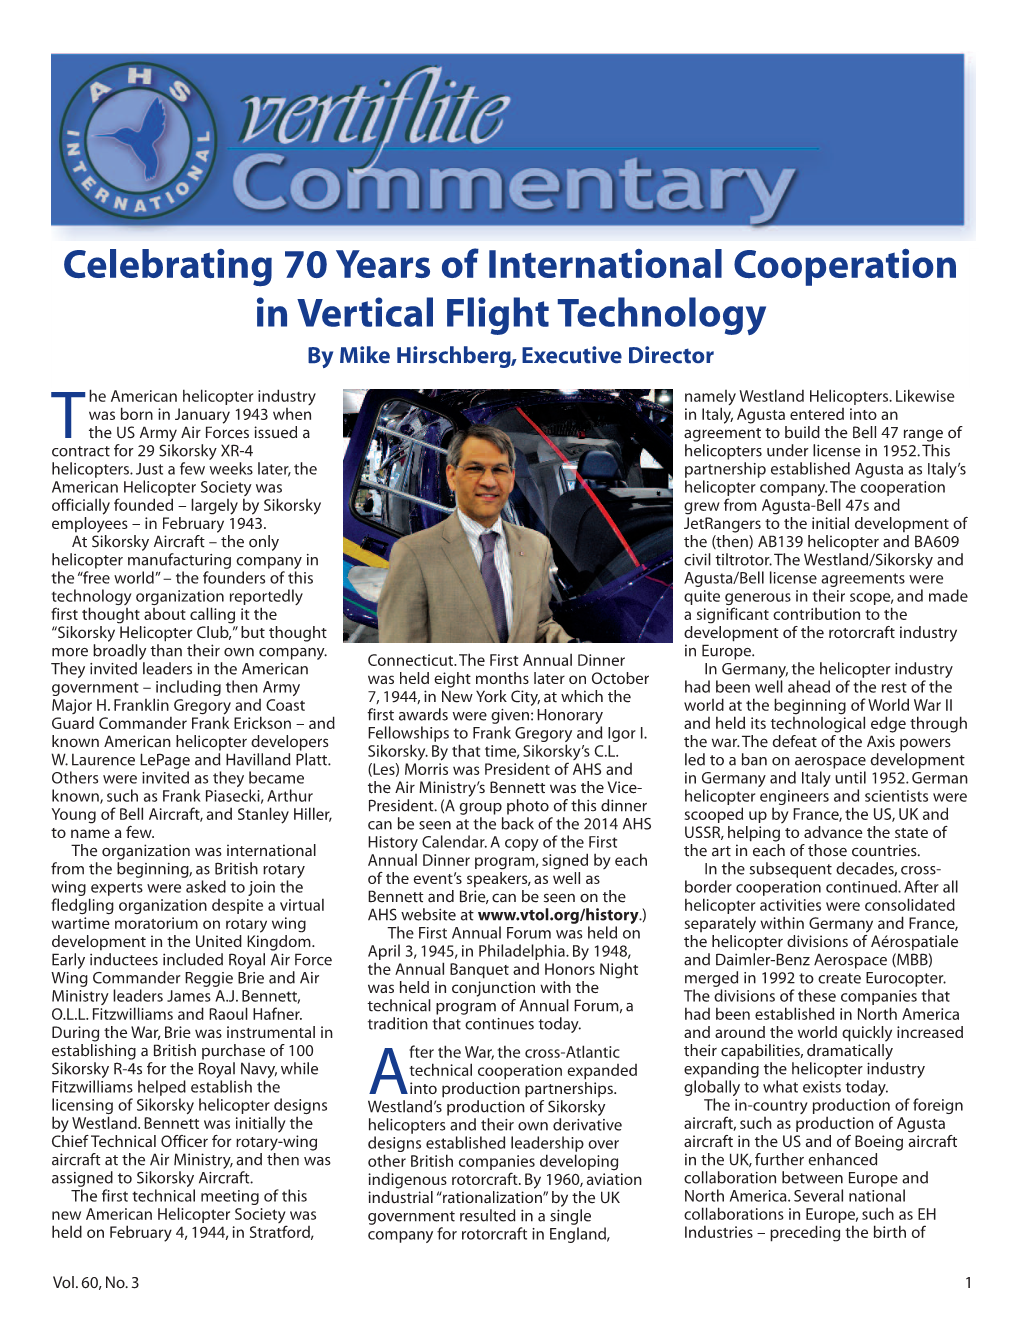 Celebrating 70 Years of International Cooperation in Vertical Flight Technology by Mike Hirschberg, Executive Director